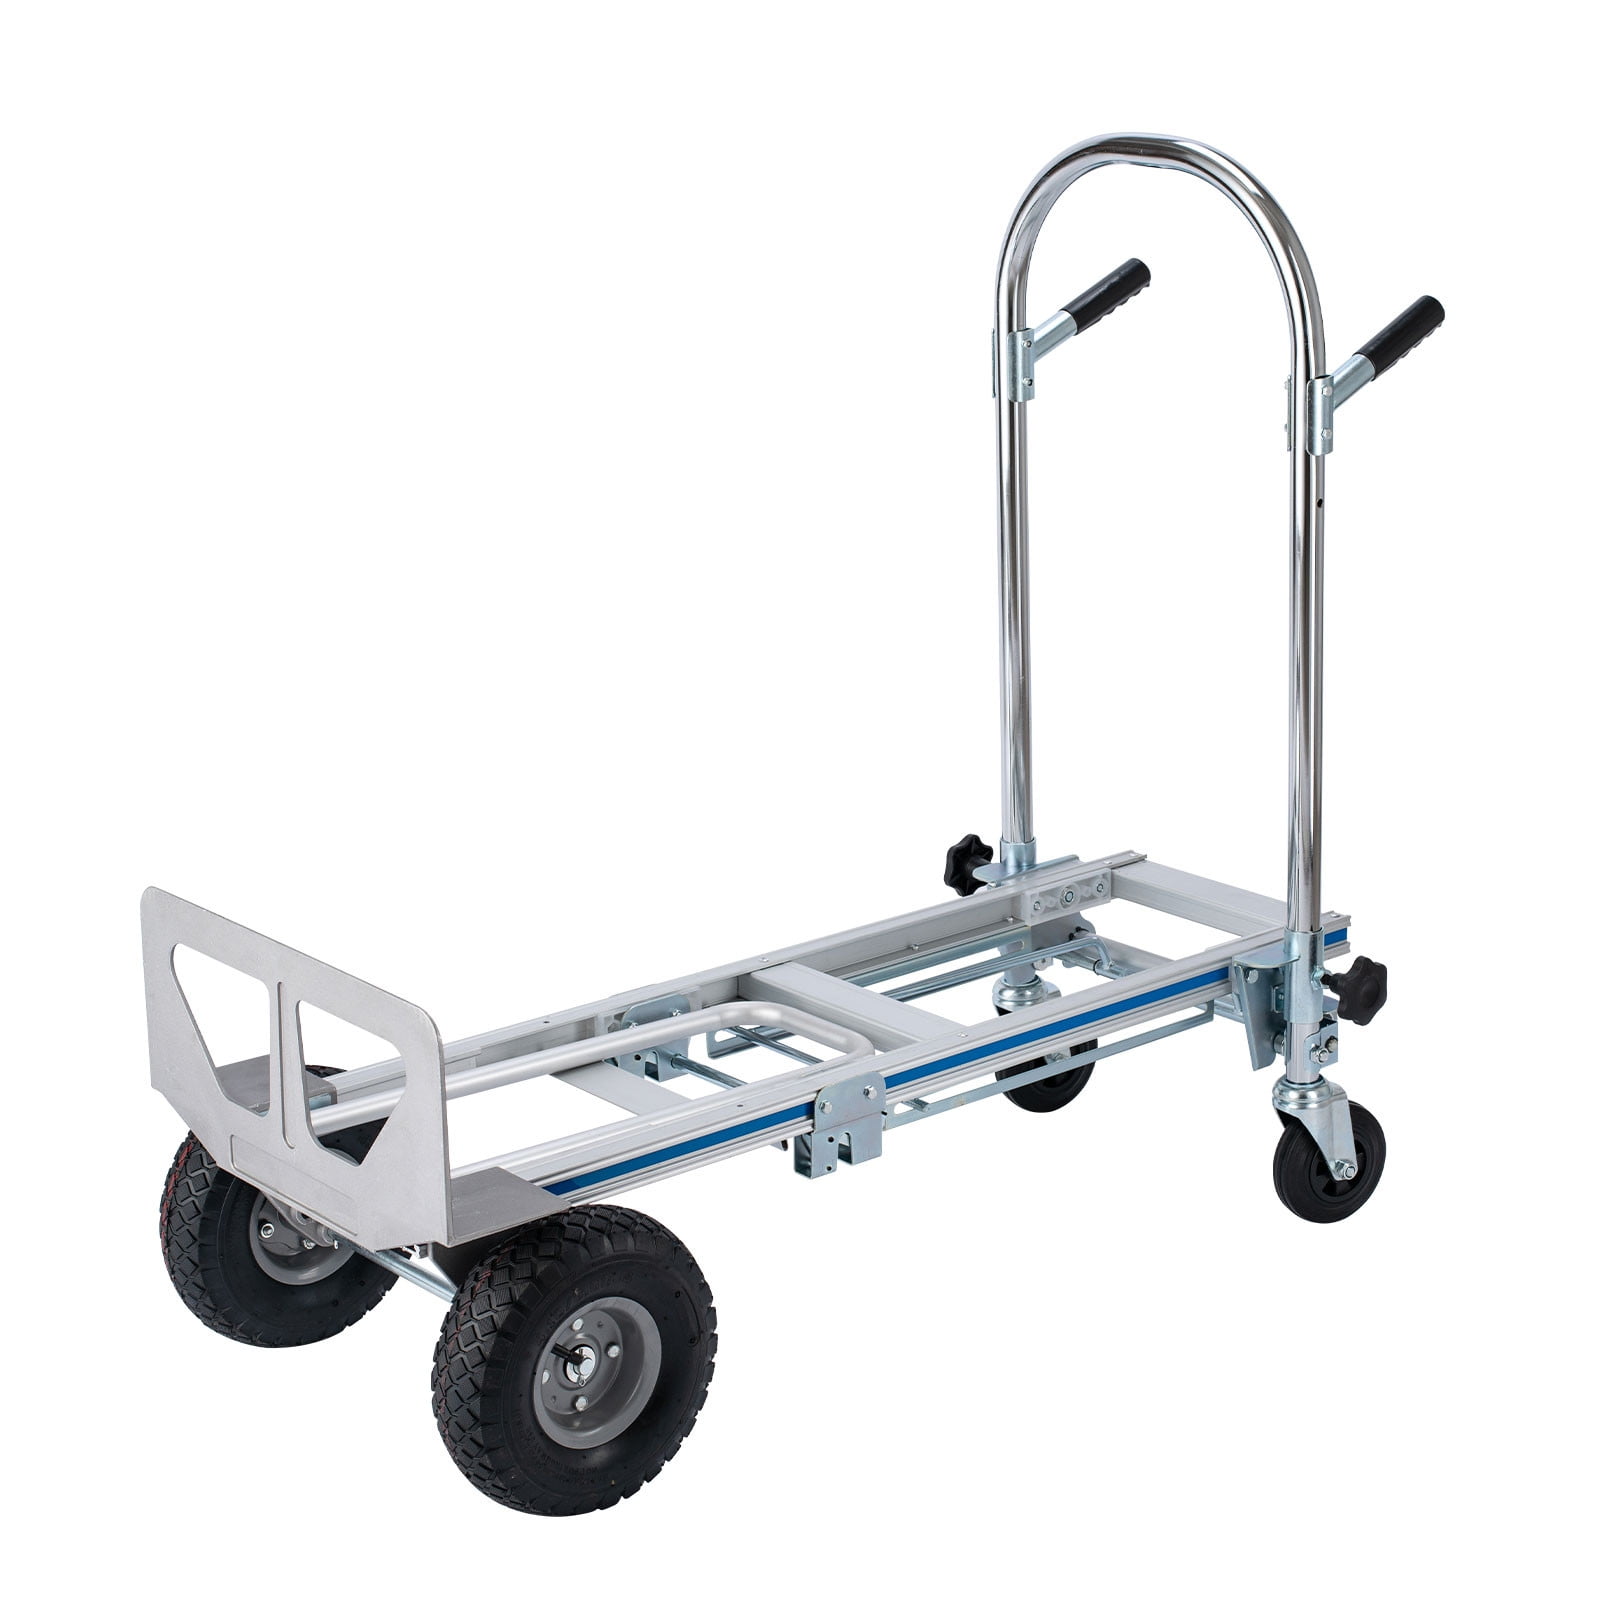 Details about   3 in 1 Aluminum Folding Sack Truck Hand Trolley Cart Car Heavy Duty Foldable 